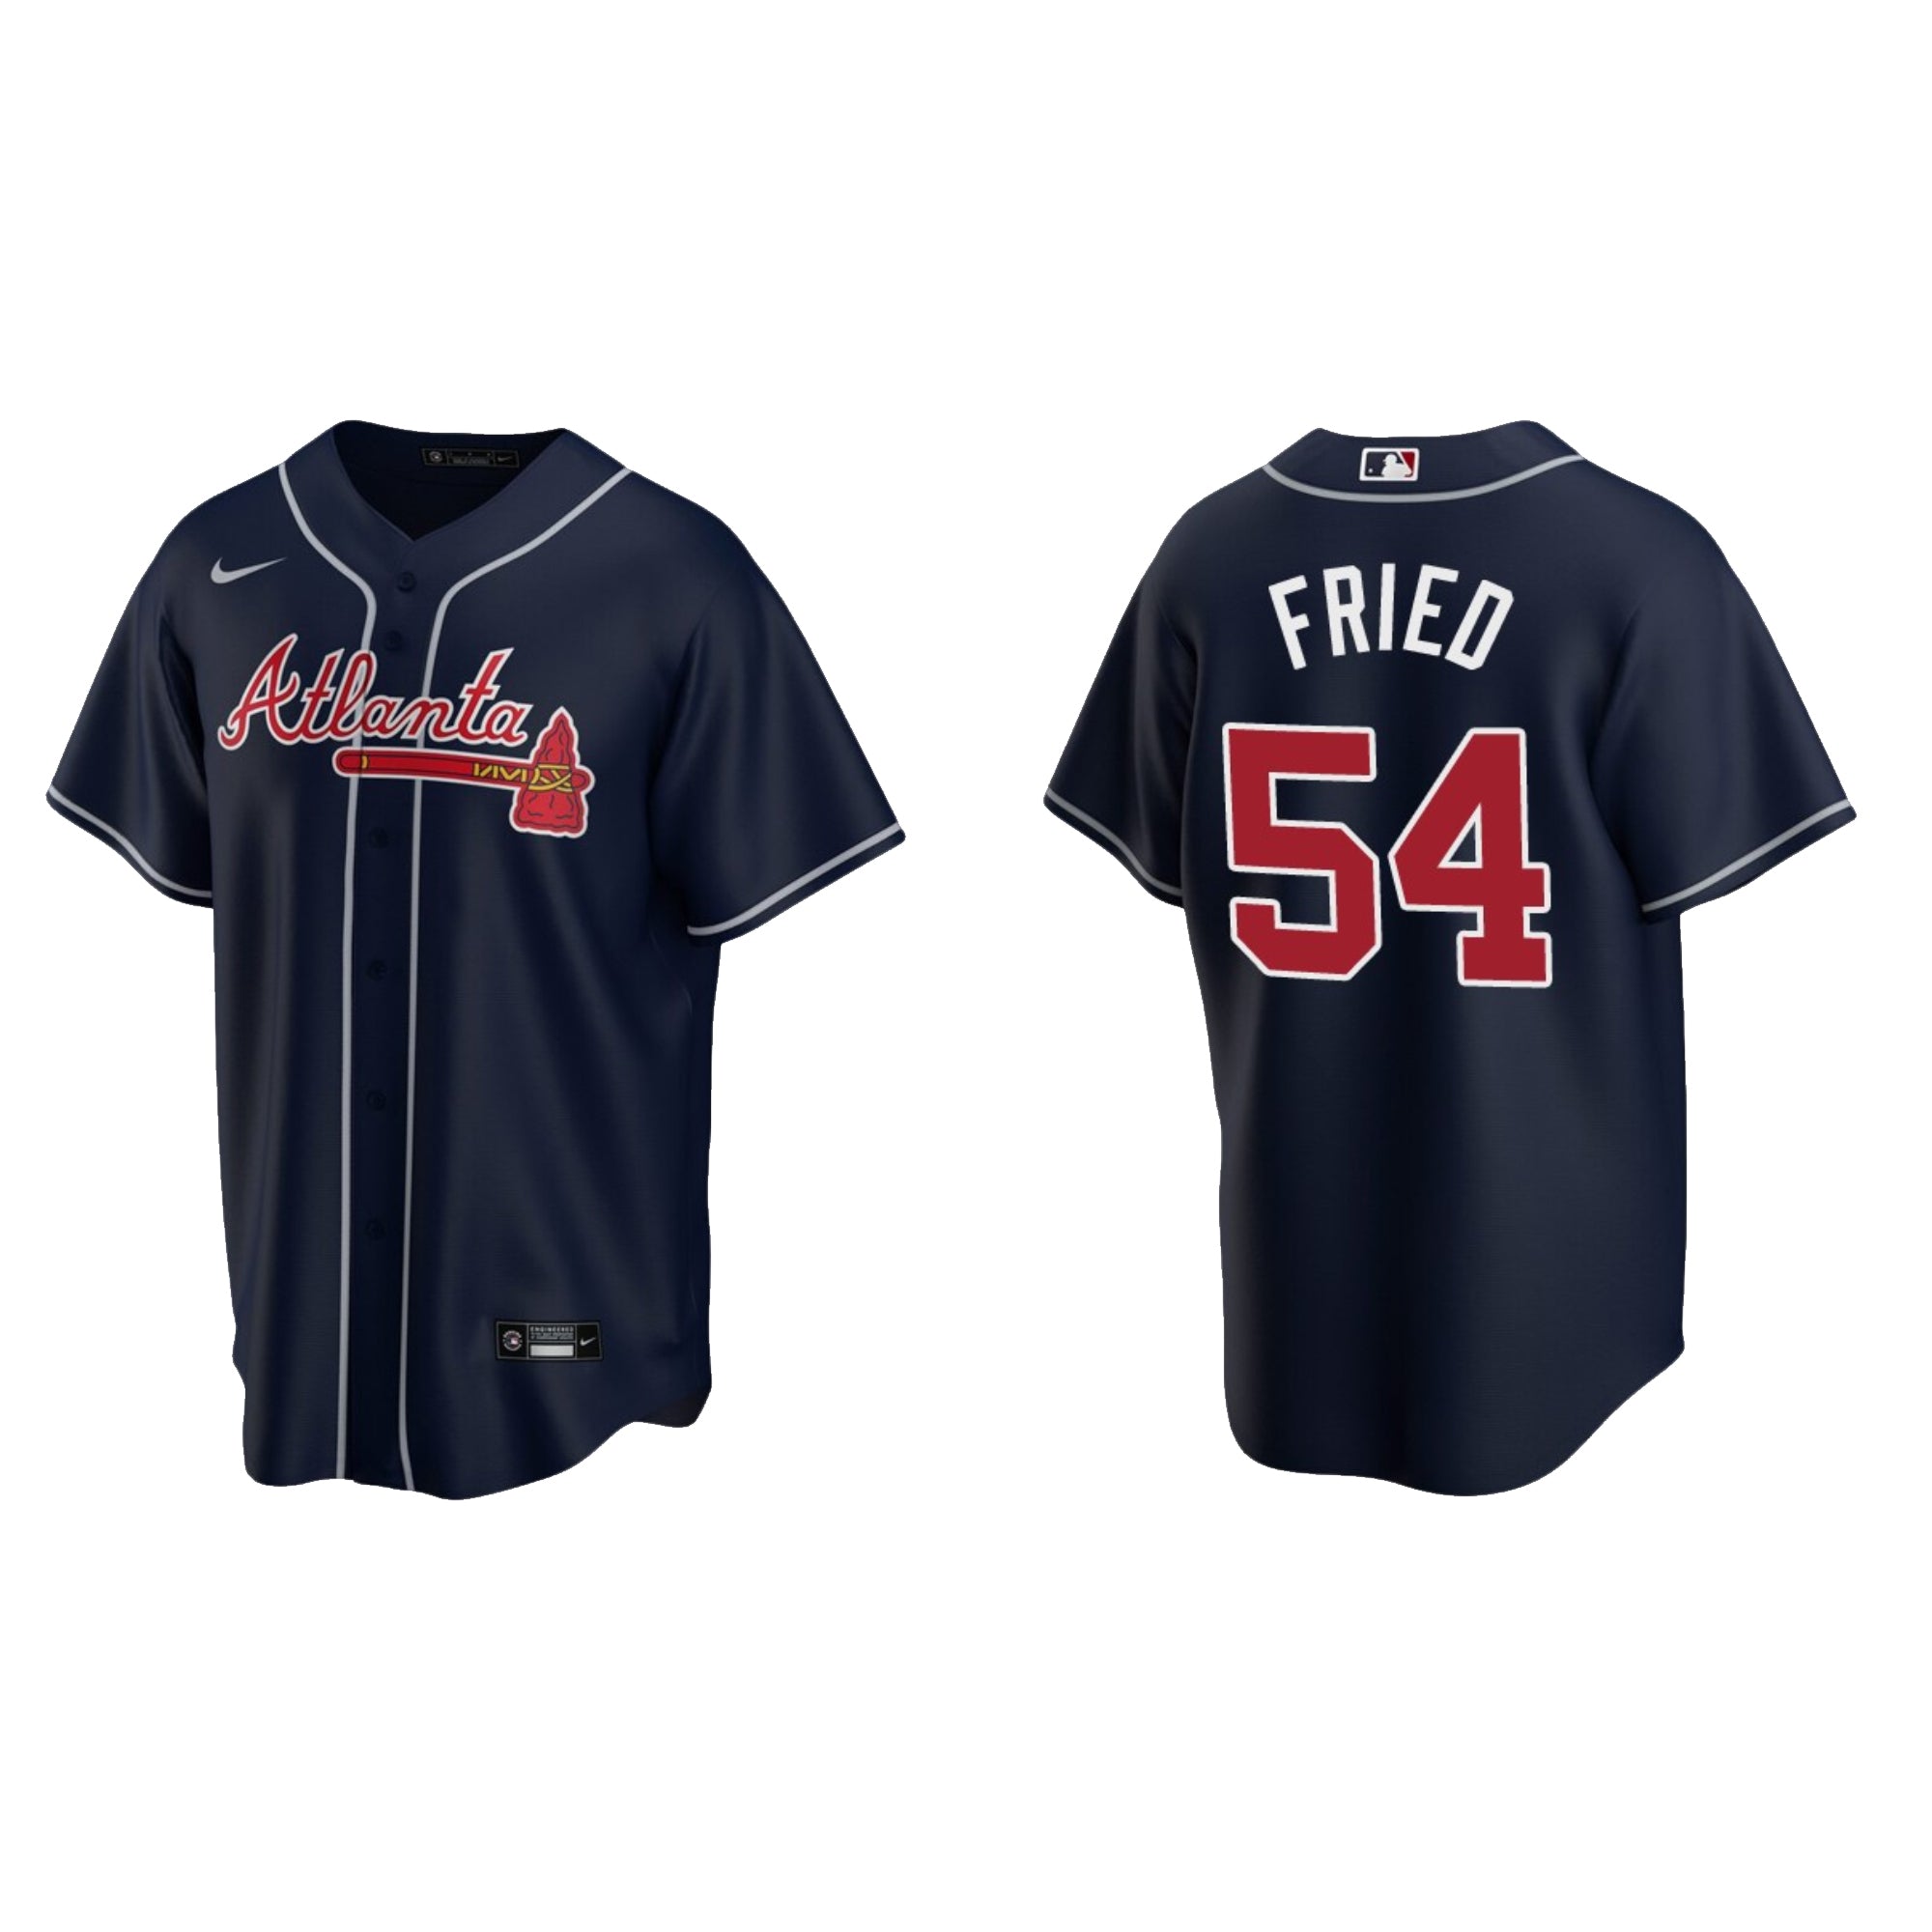 Max Fried Jersey, Authentic Braves Max Fried Jerseys & Uniform